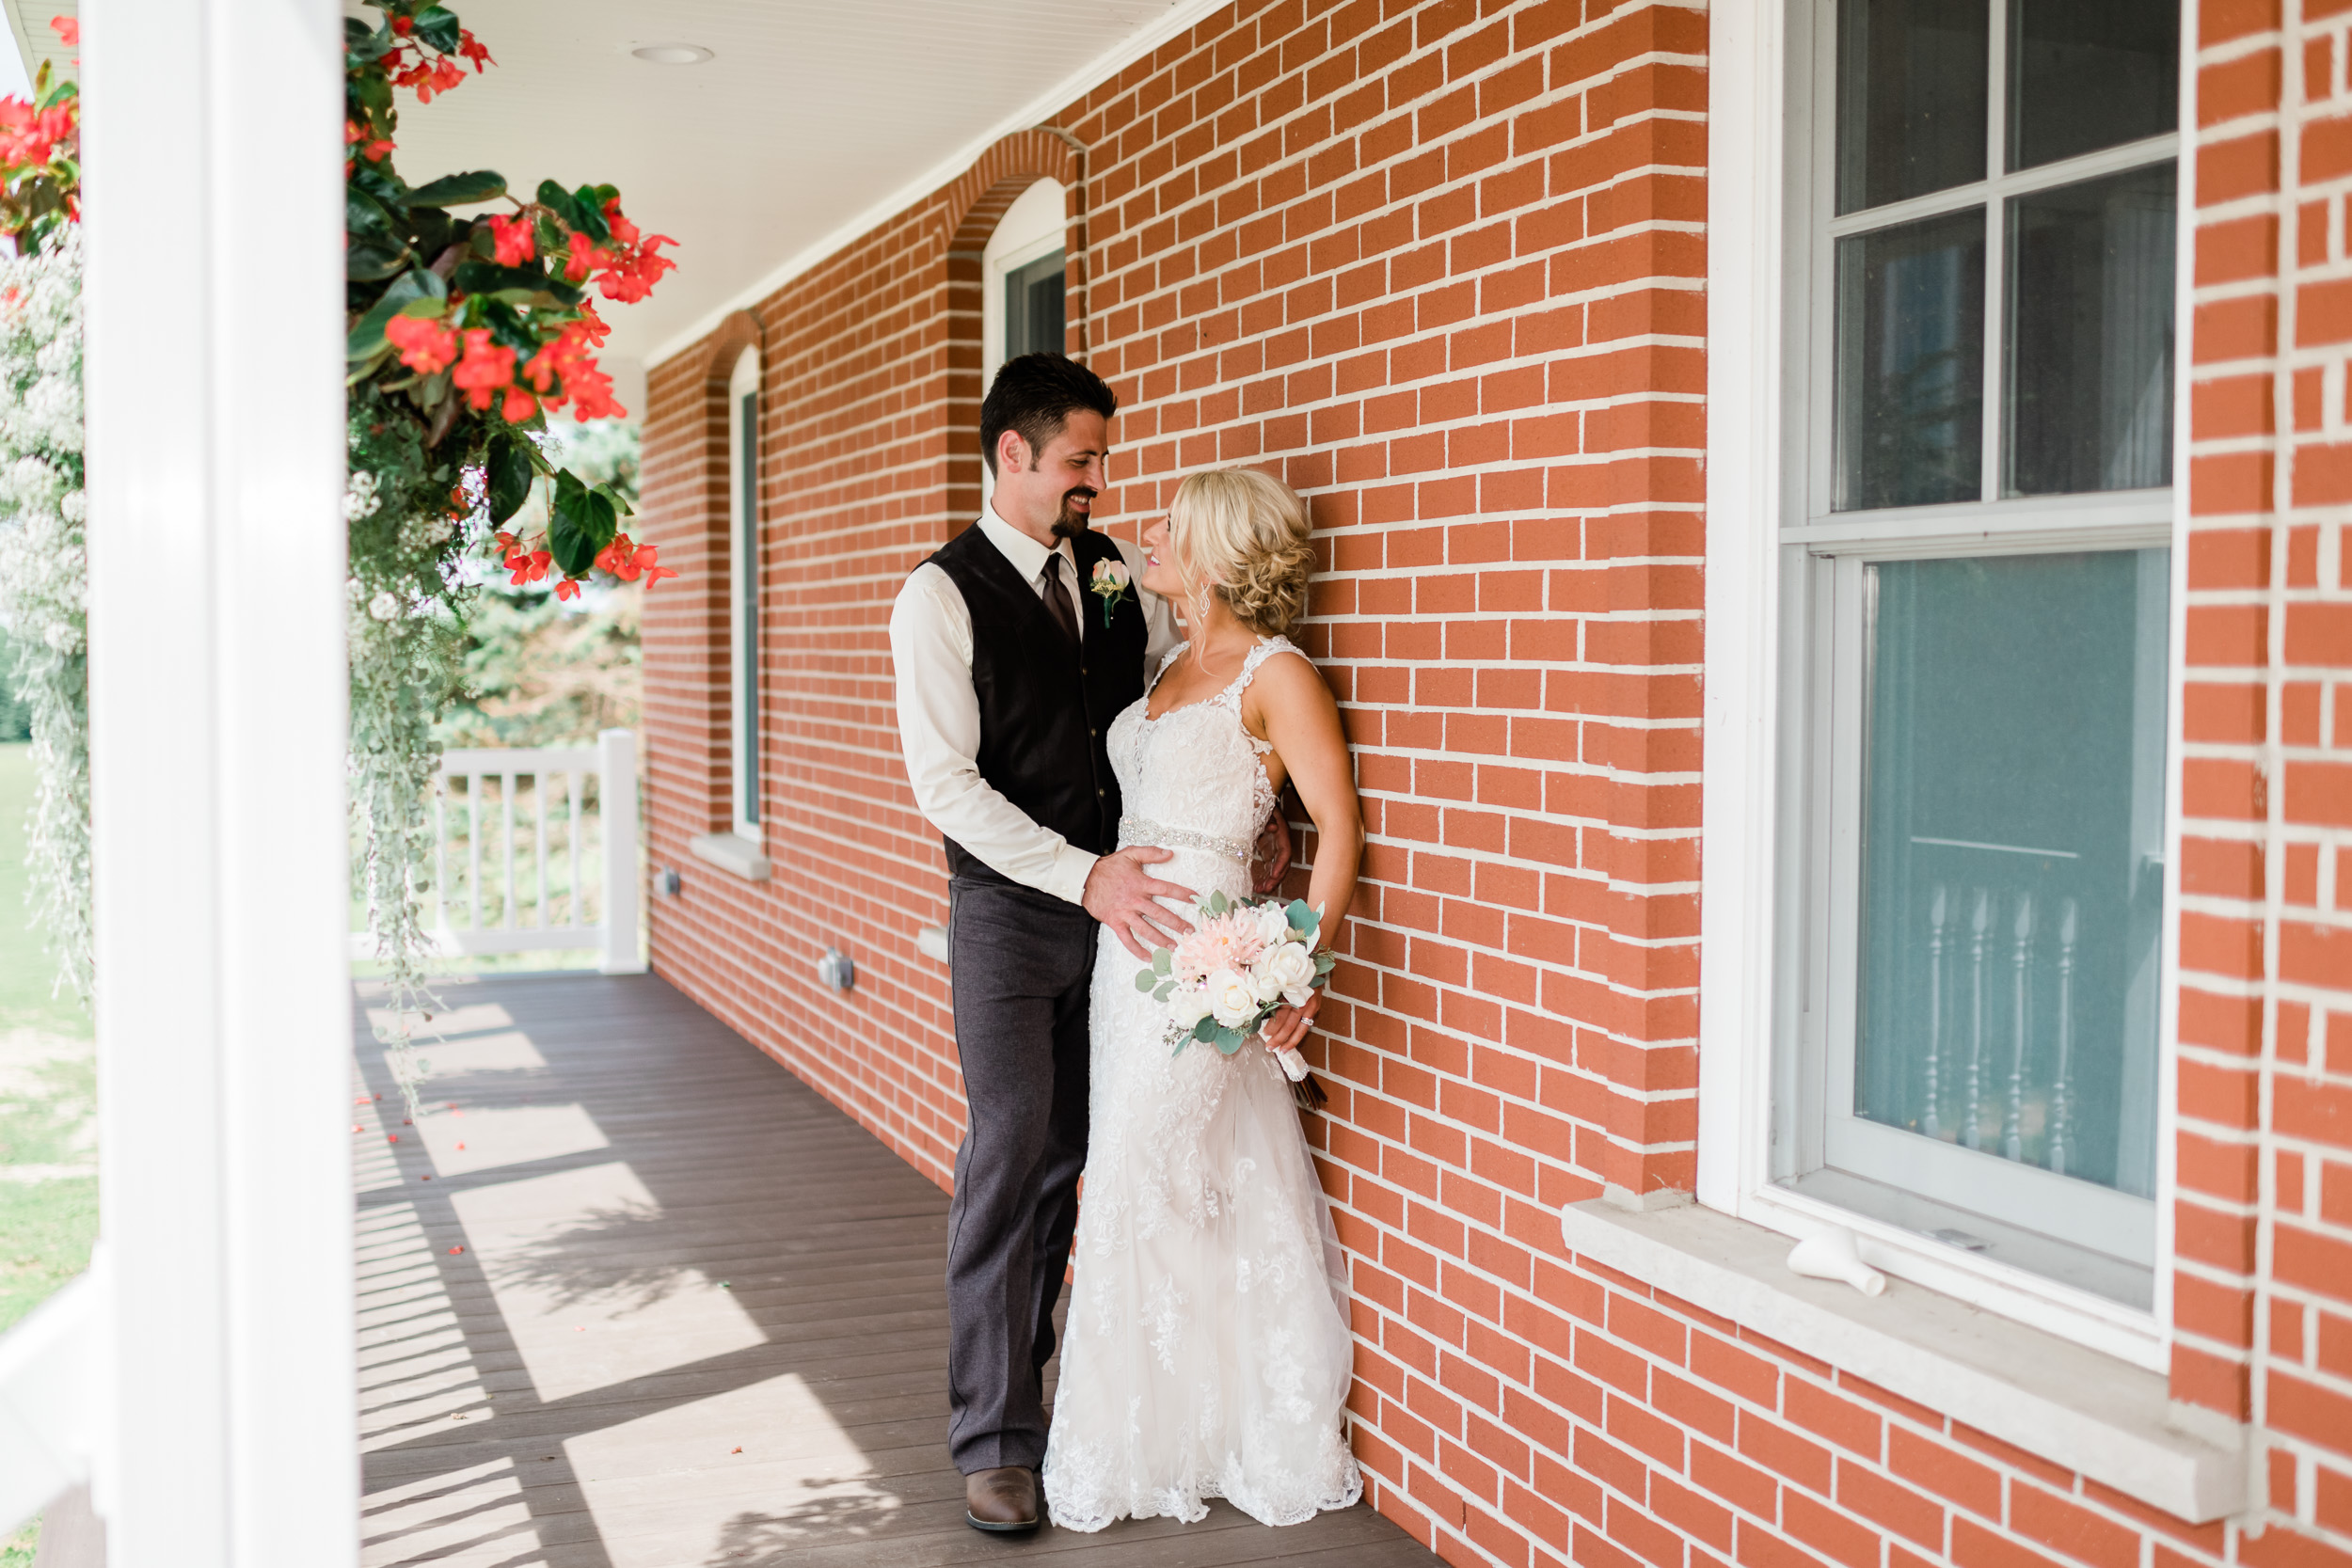 Bride and groom looking at each other on front porch